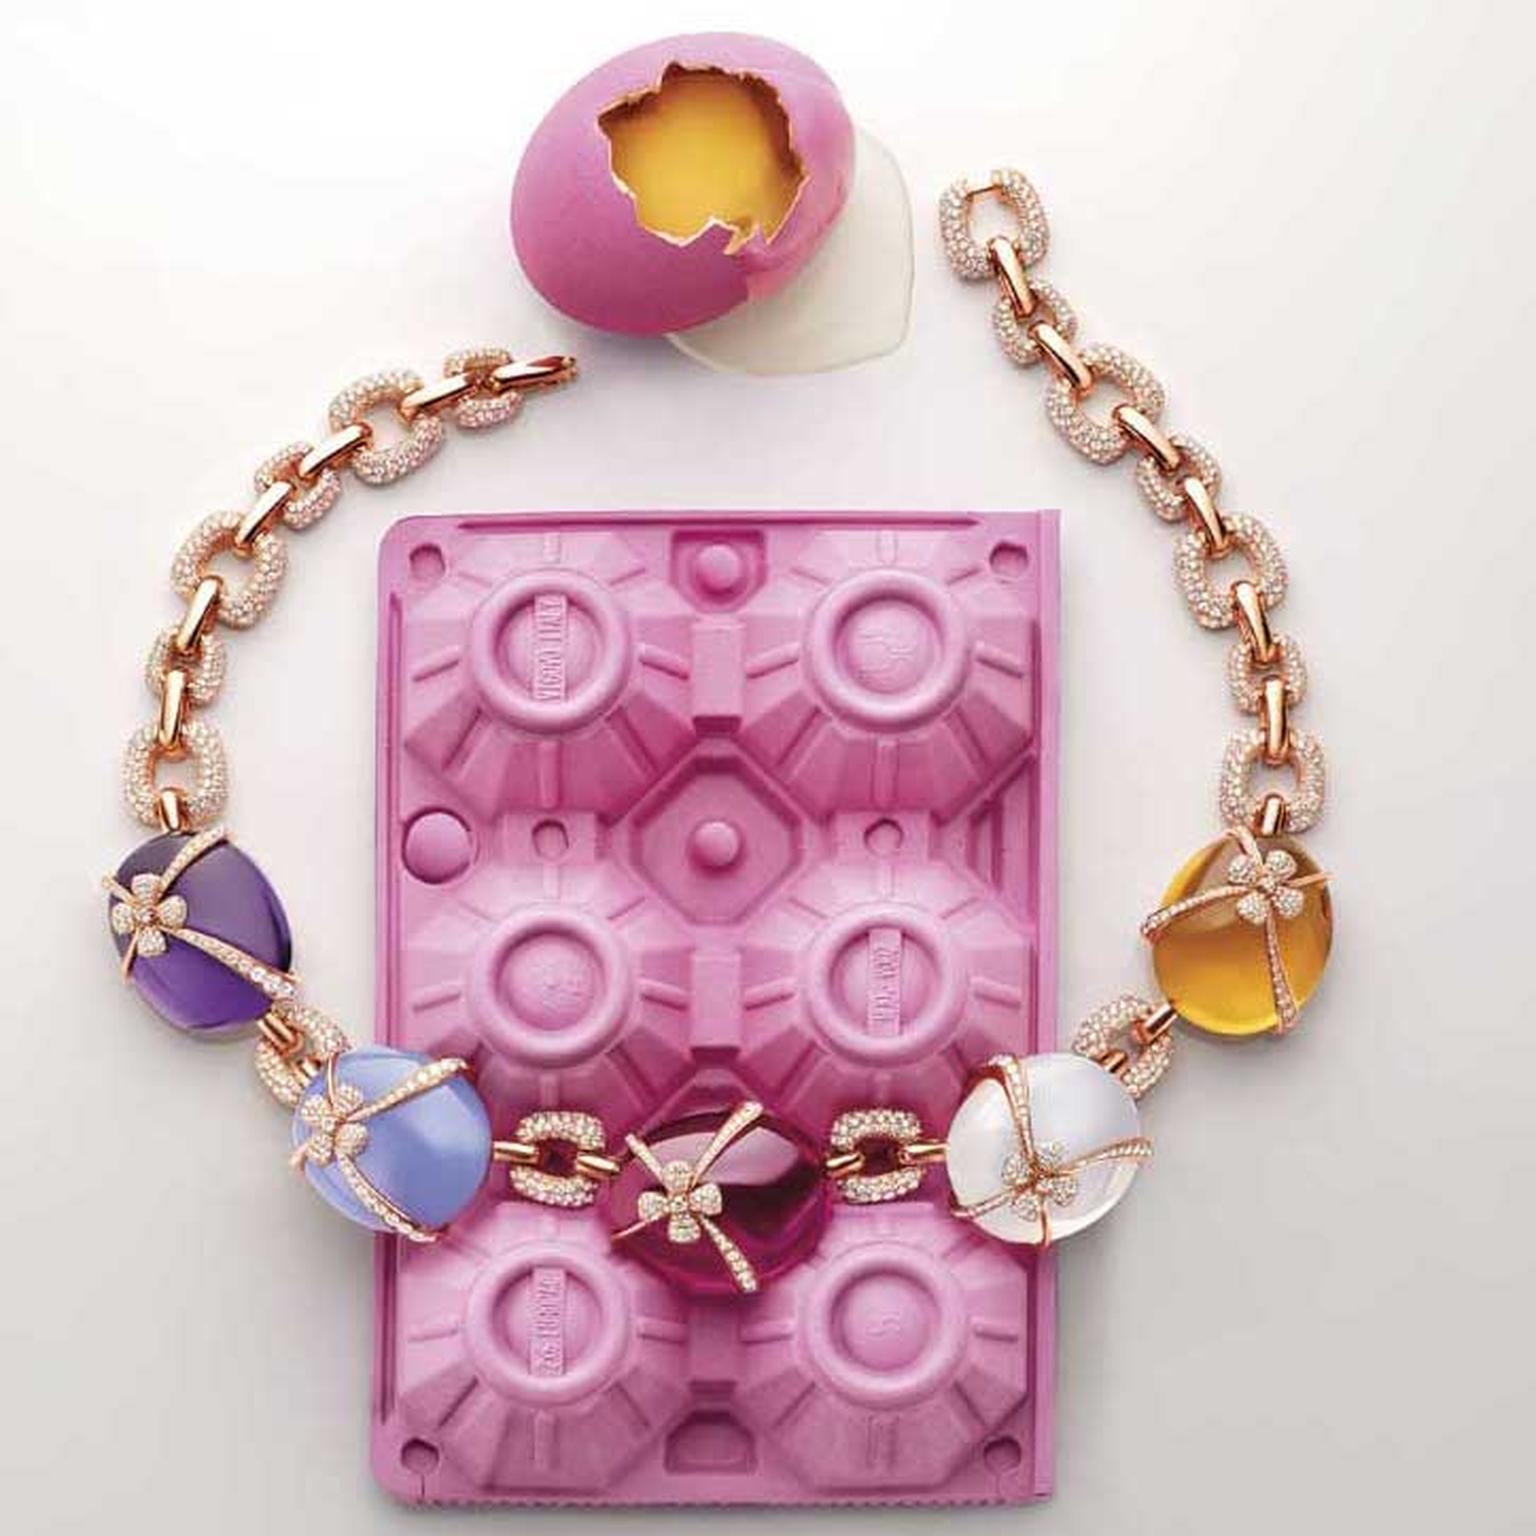 Eggs necklace from Bulgari Wild Pop high jewellery collection in pink gold